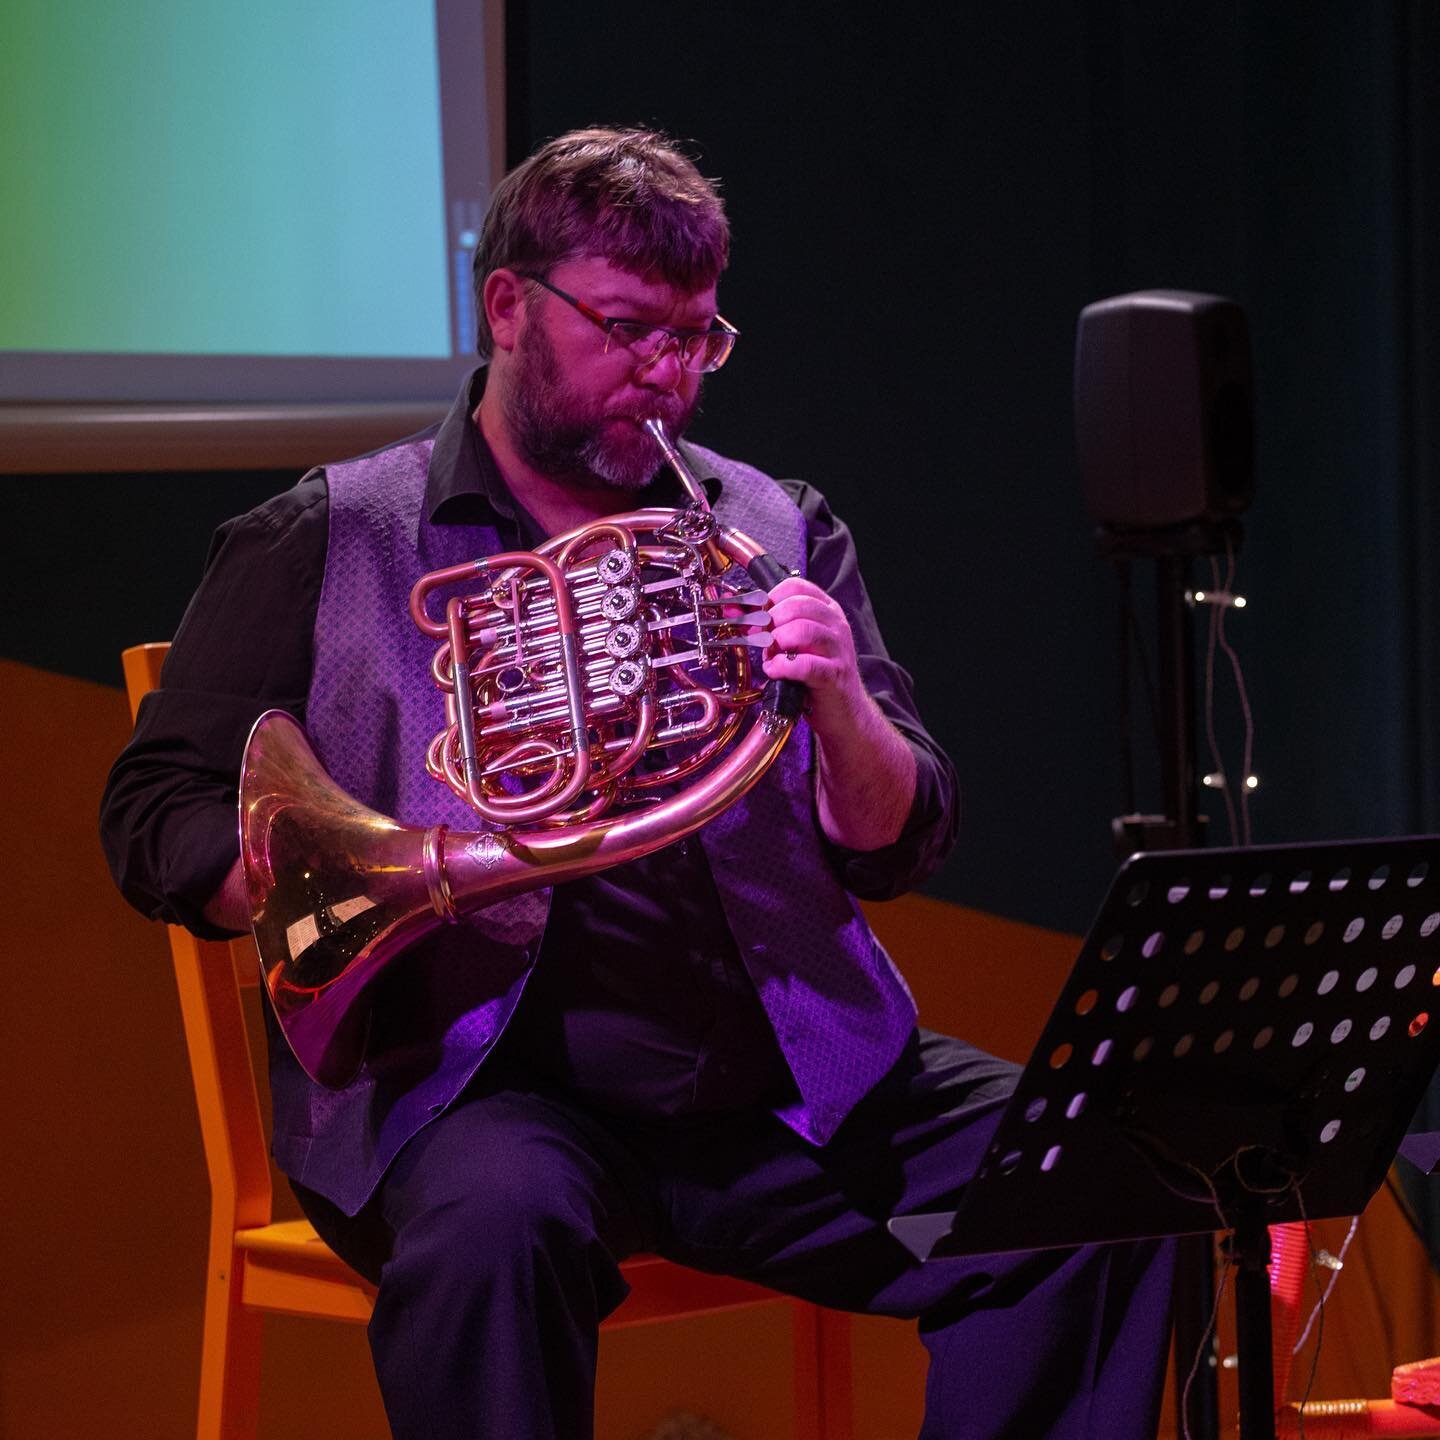 Great concert with Cormac O&rsquo;hAod&aacute;in in May at Bewley&rsquo;s Caf&eacute; Theatre!

We had an eclectic mix of new works for horn and electronics by Sebastian Adams, @cadenza433_ , Michael Riordan, @amorinacantor, and @aranogrady 📸 by @be